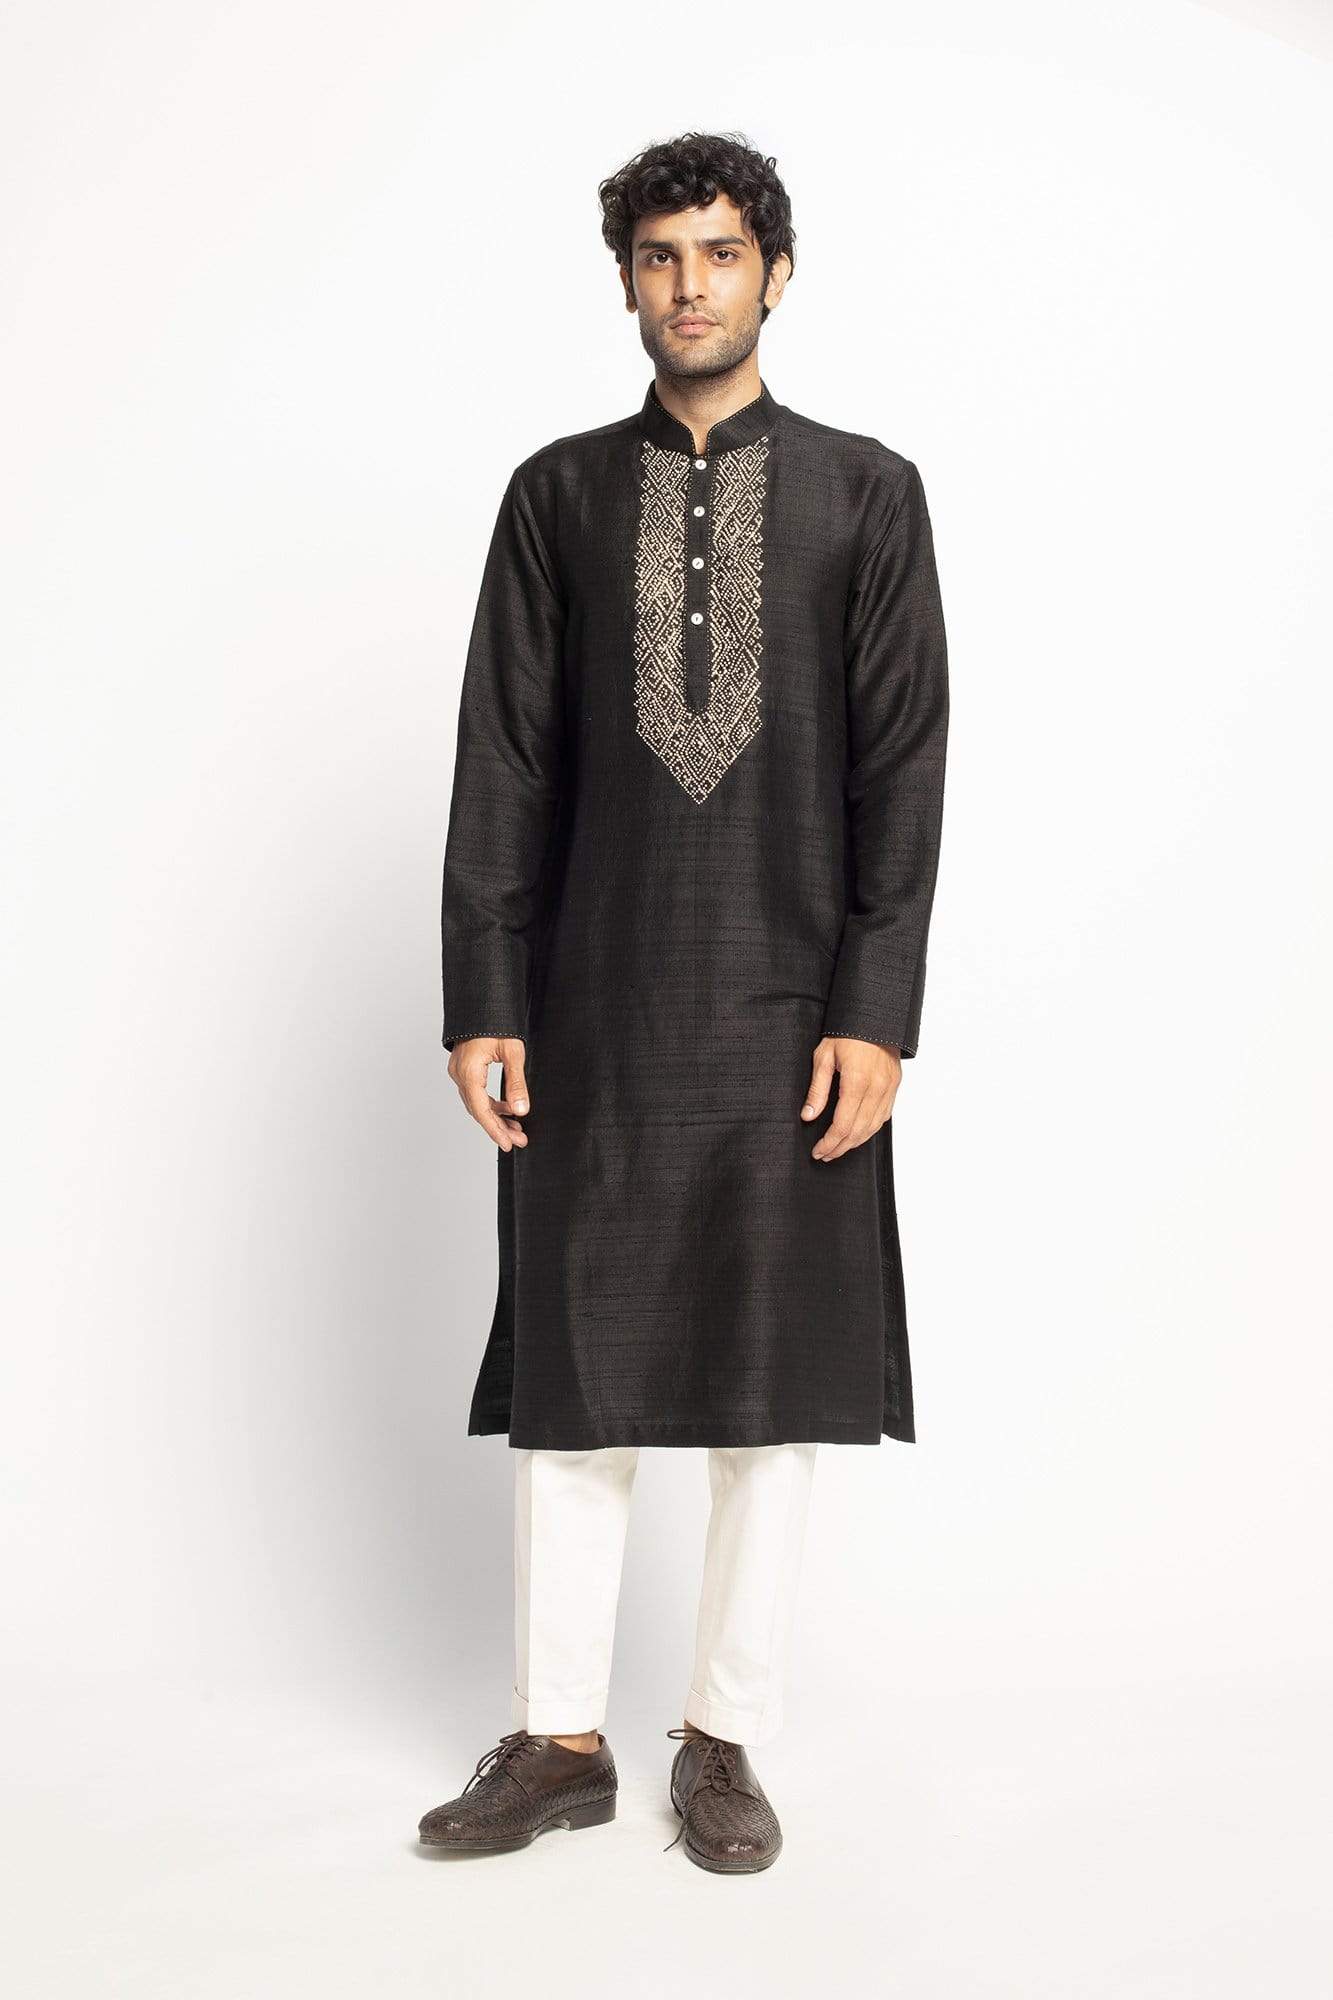 Knot Embroidery Kurta Set Indian Clothing in Denver, CO, Aurora, CO, Boulder, CO, Fort Collins, CO, Colorado Springs, CO, Parker, CO, Highlands Ranch, CO, Cherry Creek, CO, Centennial, CO, and Longmont, CO. NATIONWIDE SHIPPING USA- India Fashion X